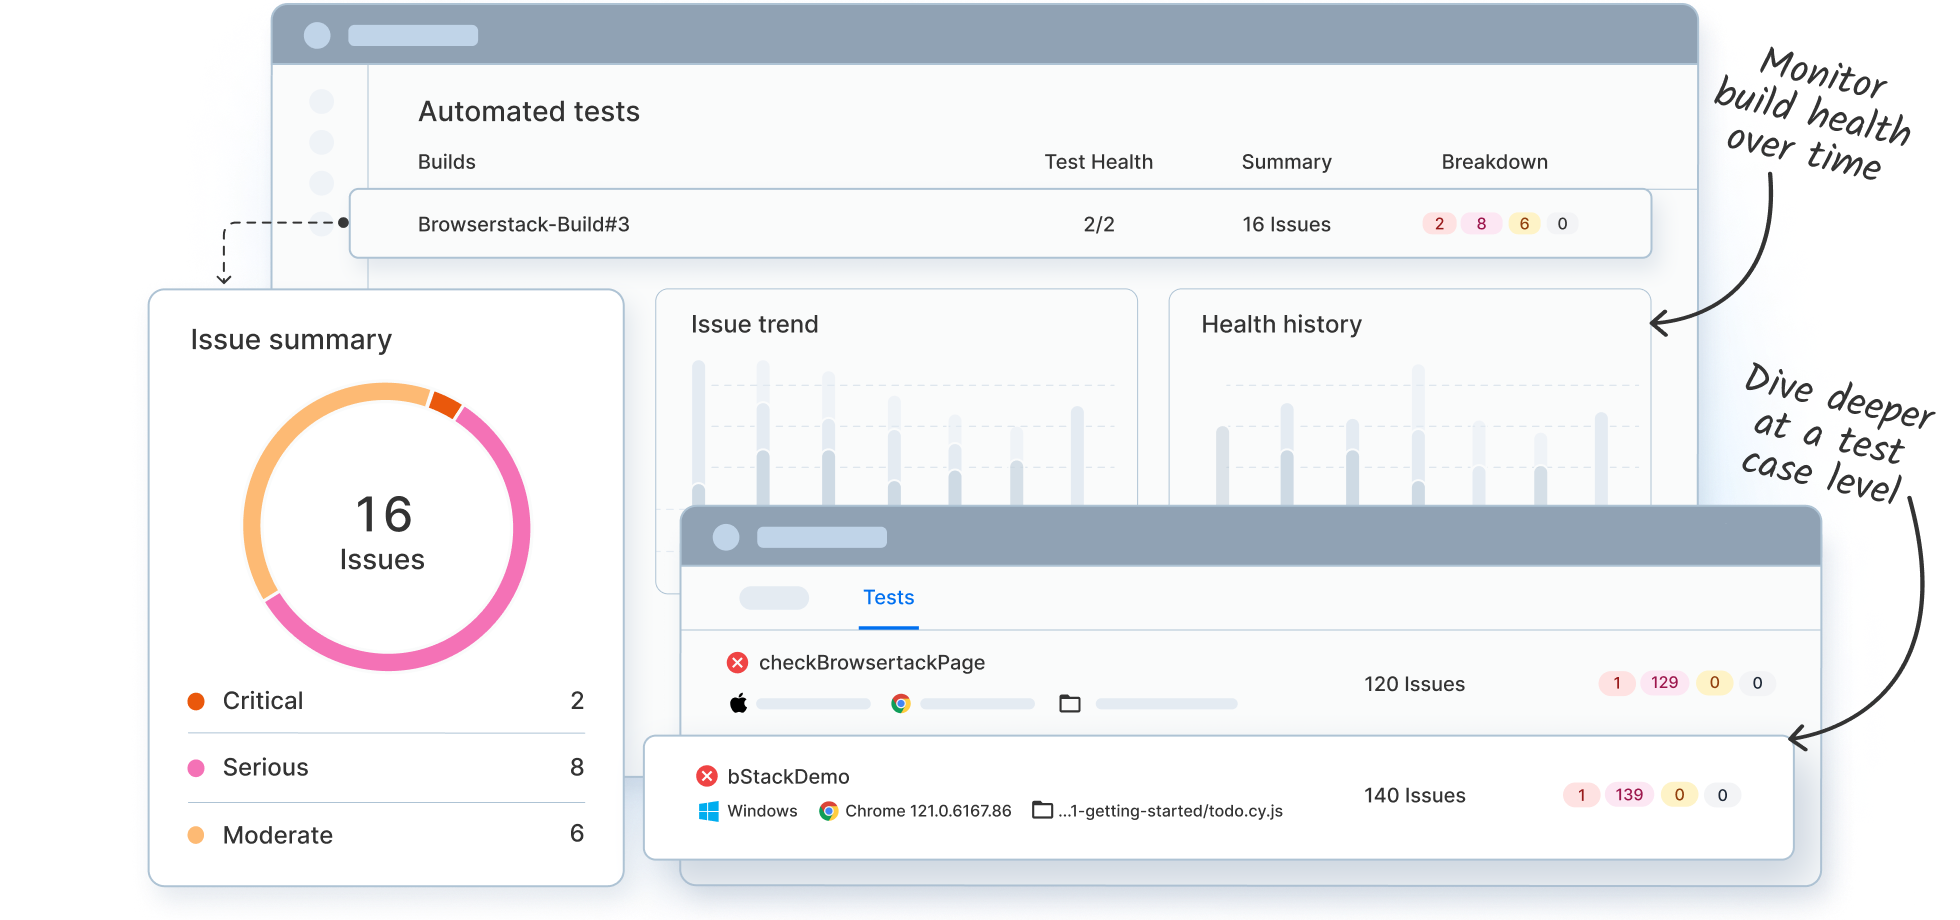 Monitor build health over time with actionable reports